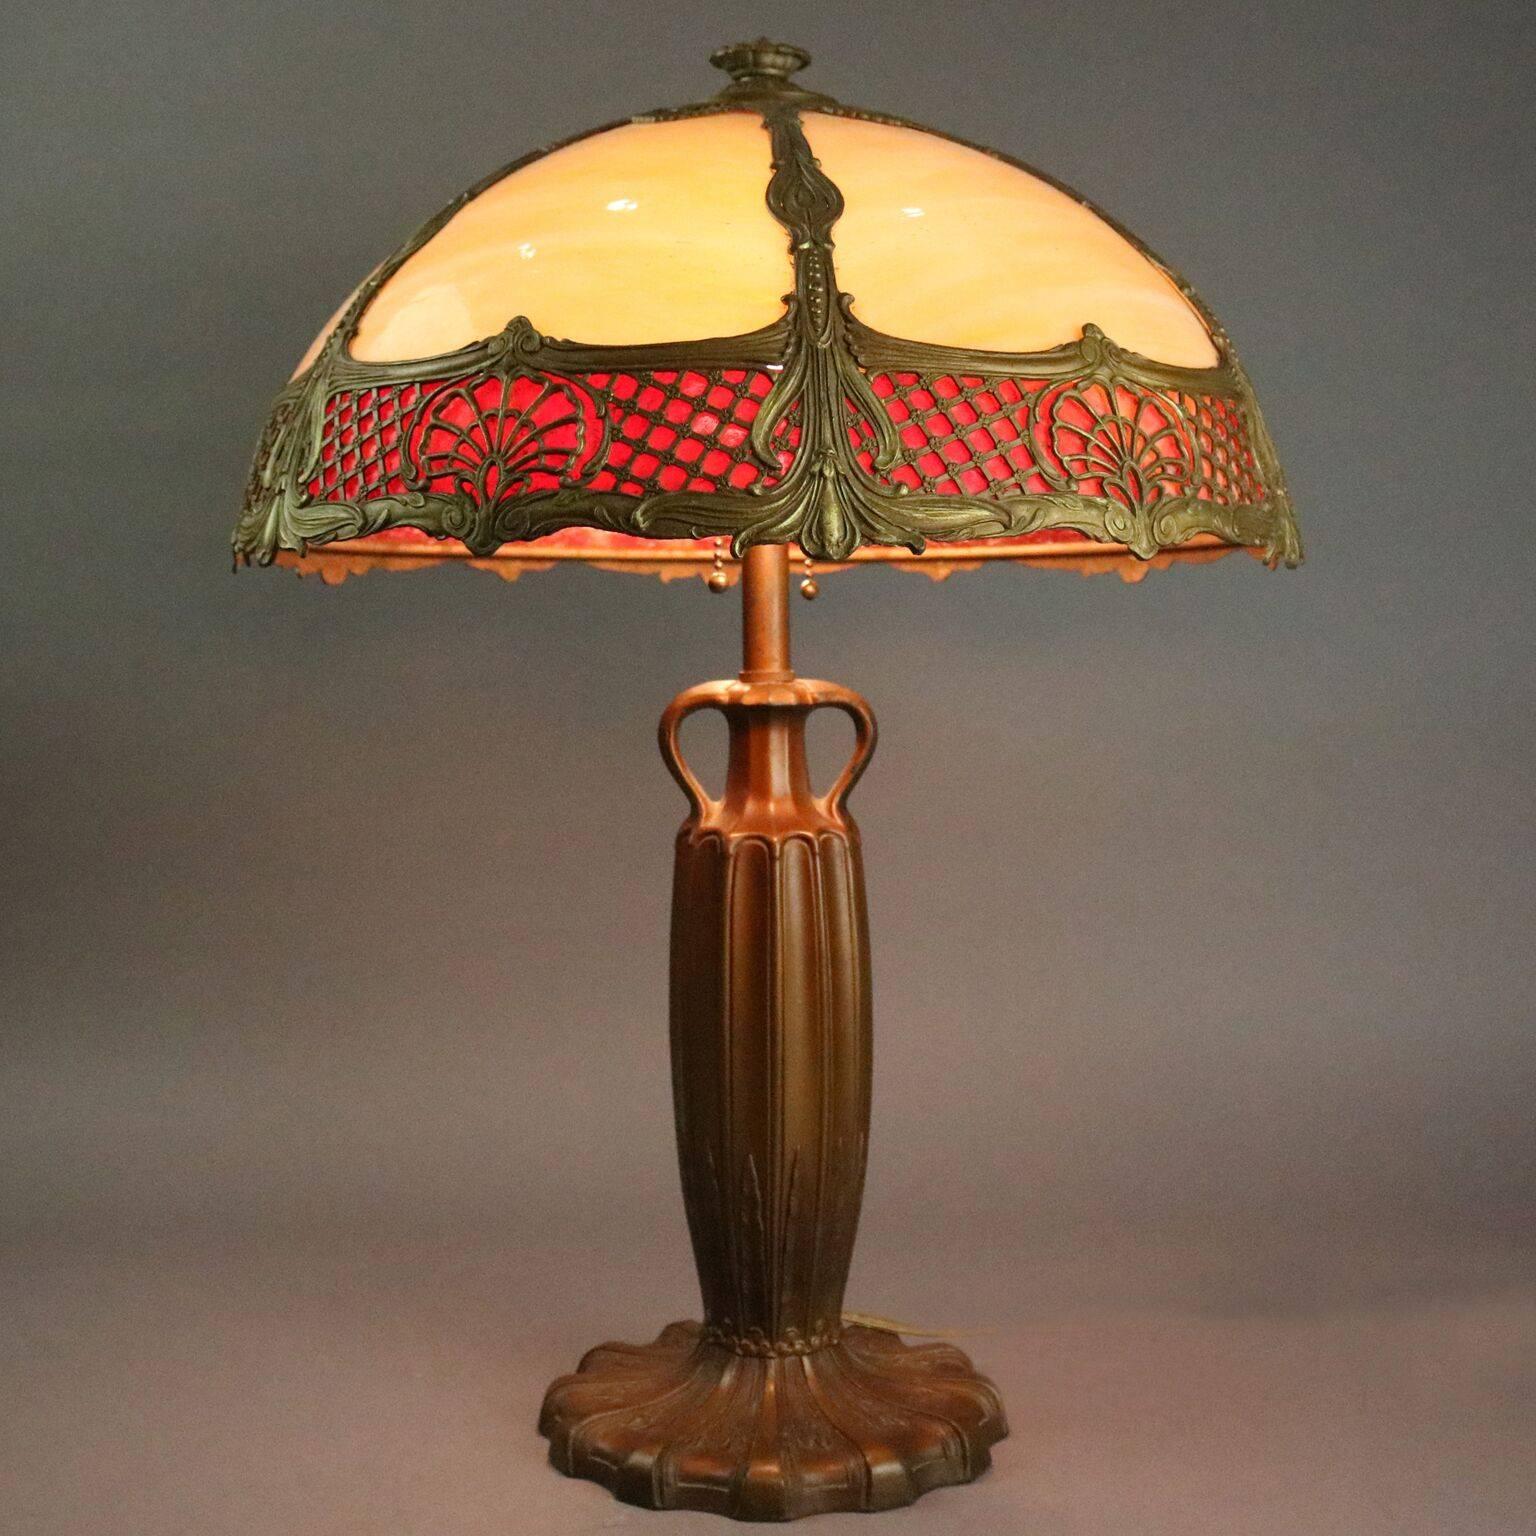 Antique Arts and Crafts Royal Lamp Co. table lamp features six-panel shade with cream and red slag glass in a foliate filigree bronze frame which covers two lights supported by a double handle bronze base, newly re-wired, circa 1920

Measures: